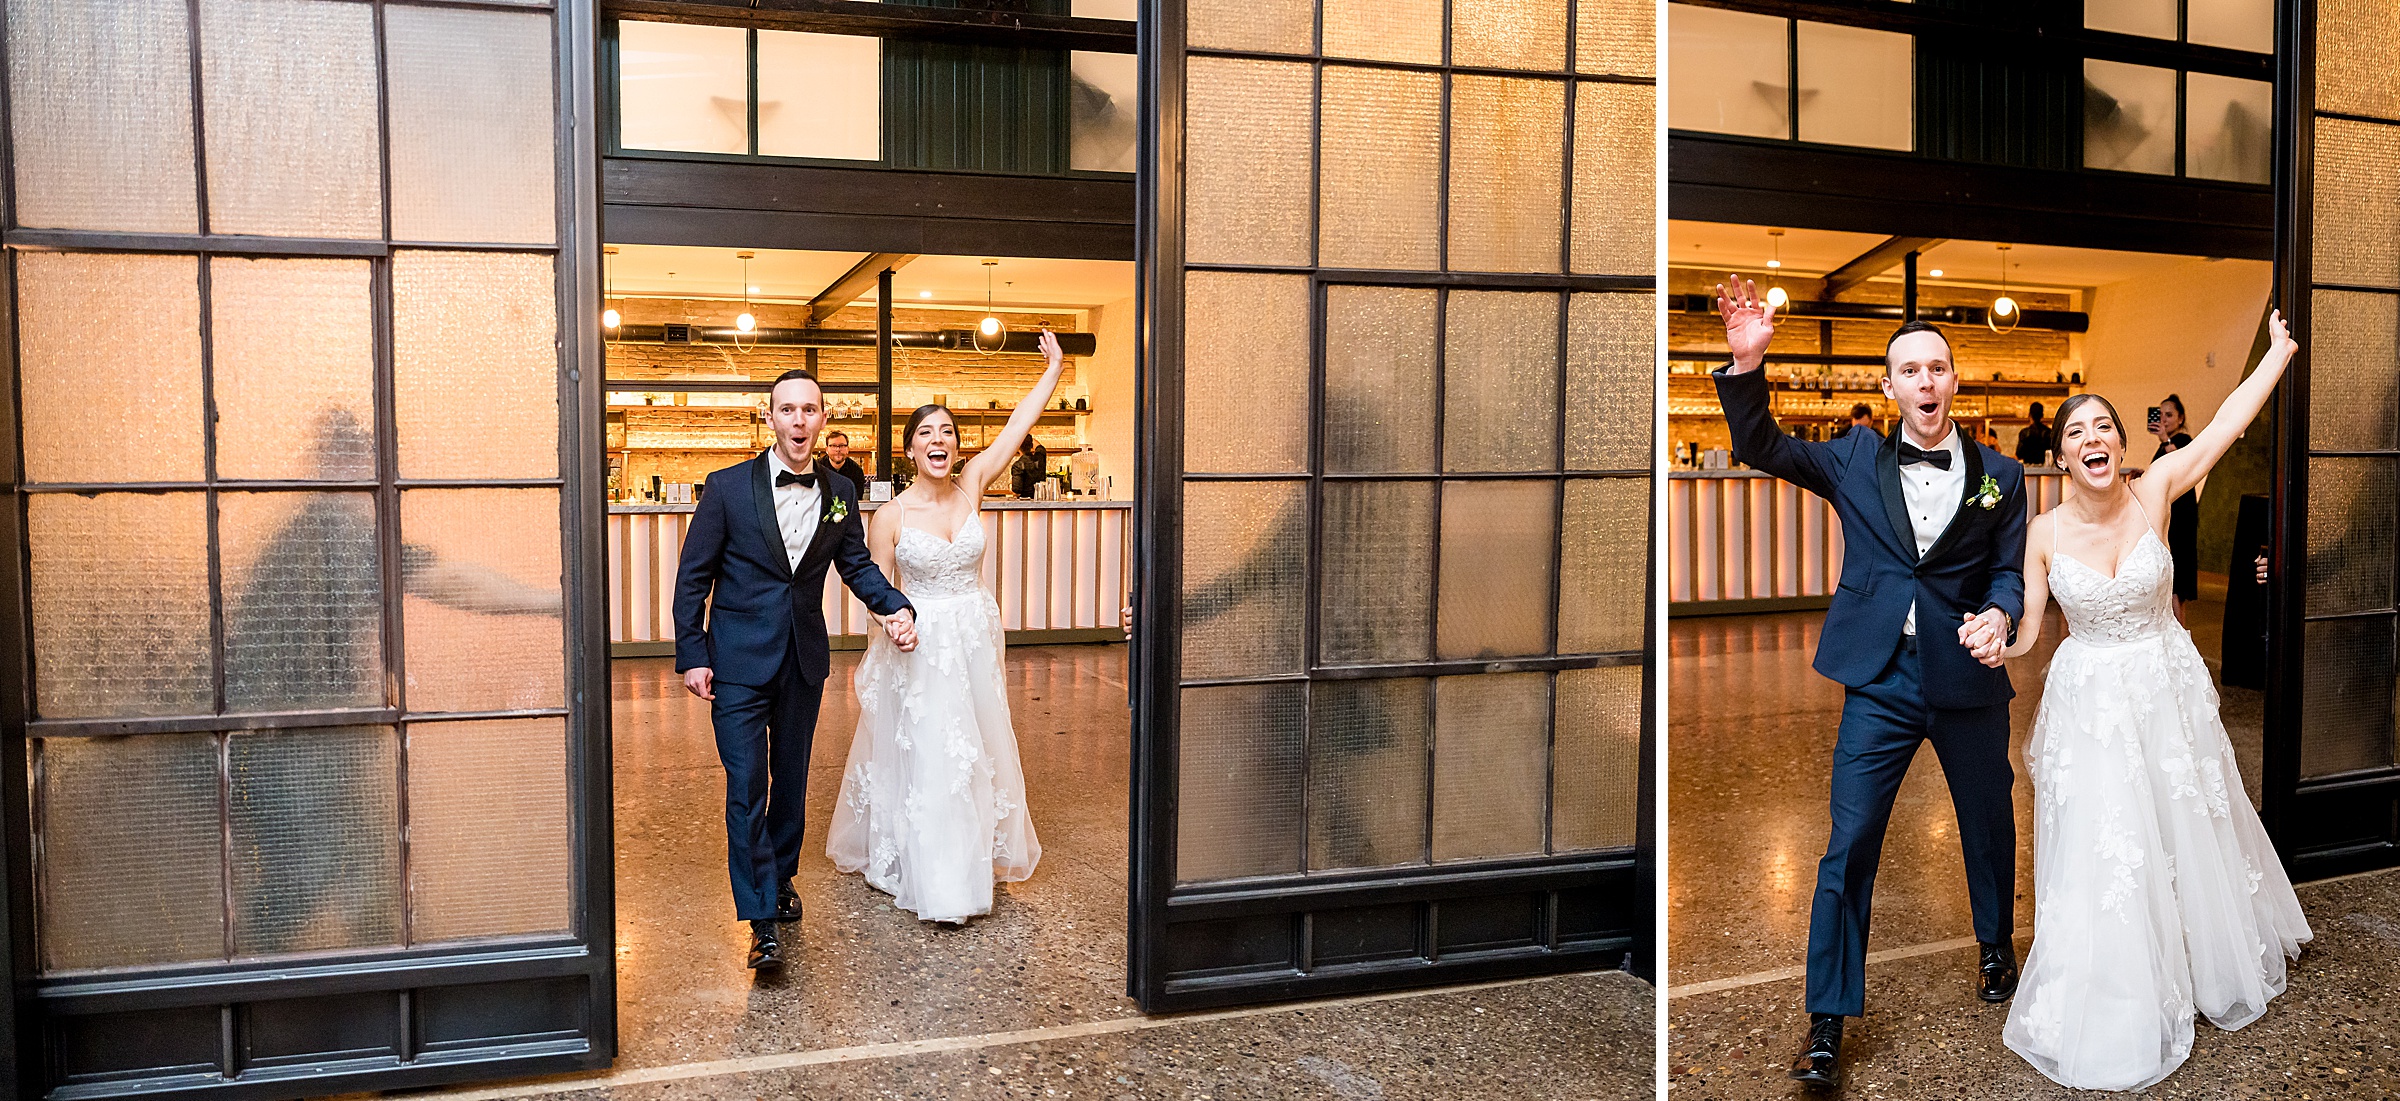 At a Lilah Events Wedding, the bride and groom wave at each other in front of a glass door.